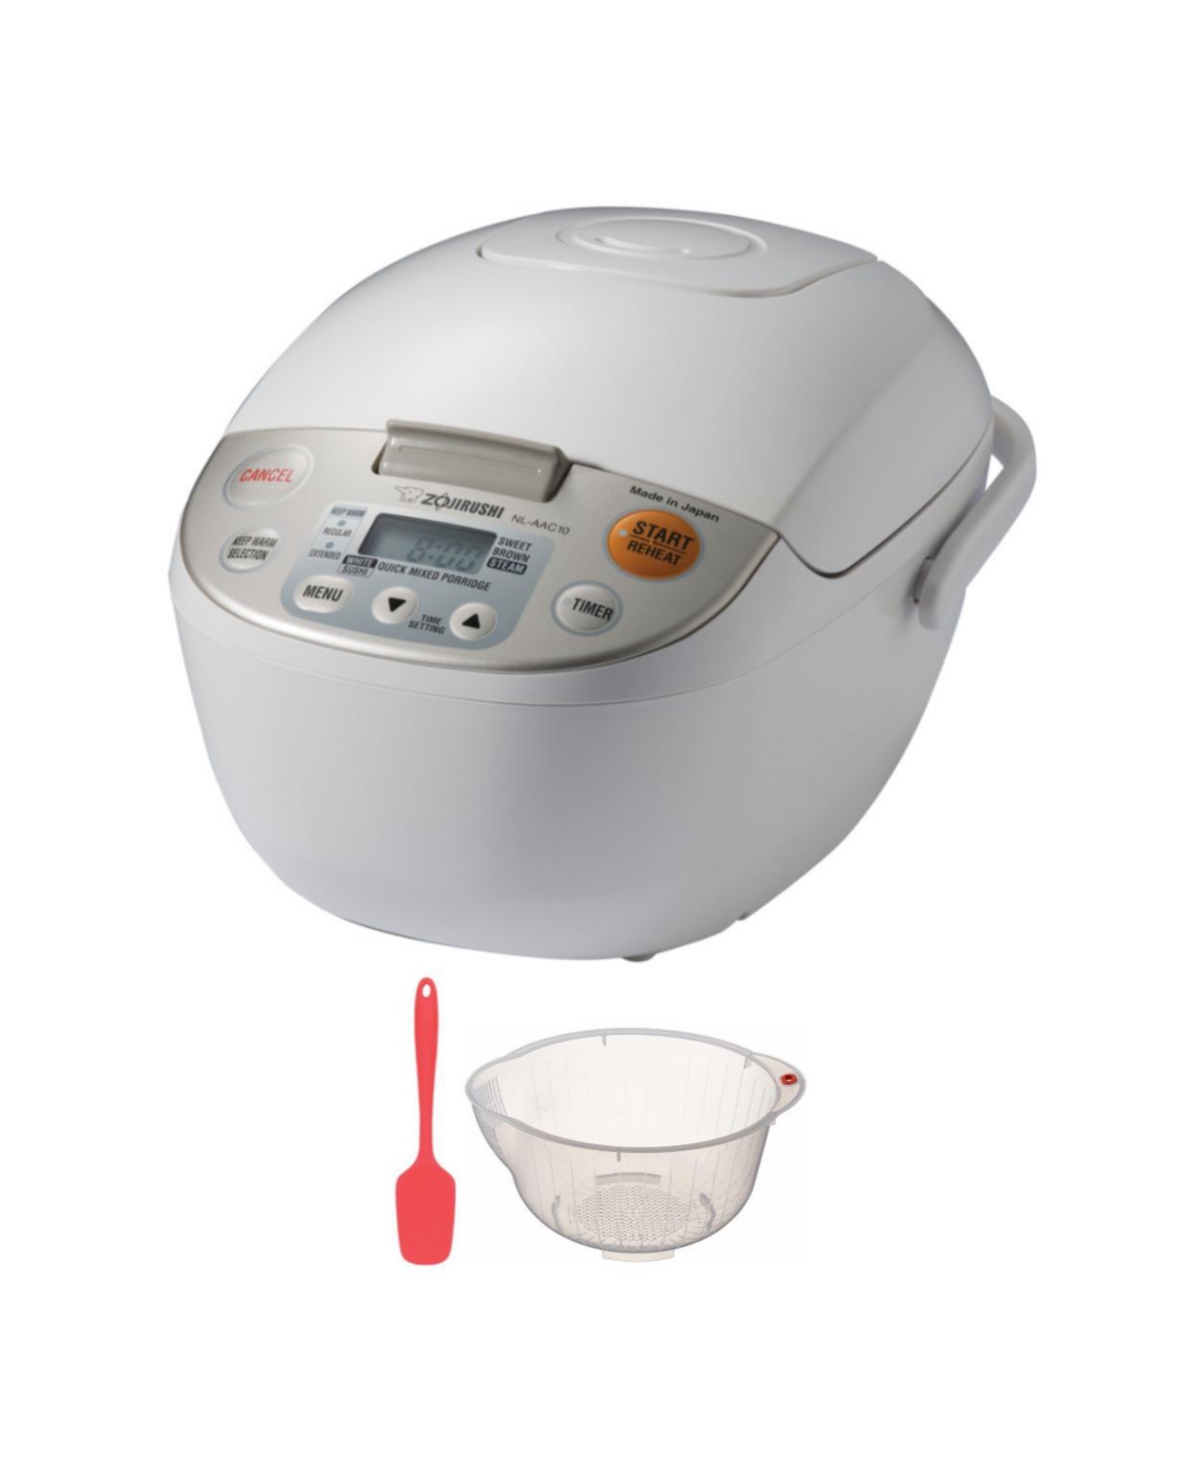 Nl-AAC10 Micom Rice Cooker and Warmer with Rice Washing Bowl Bundle - White